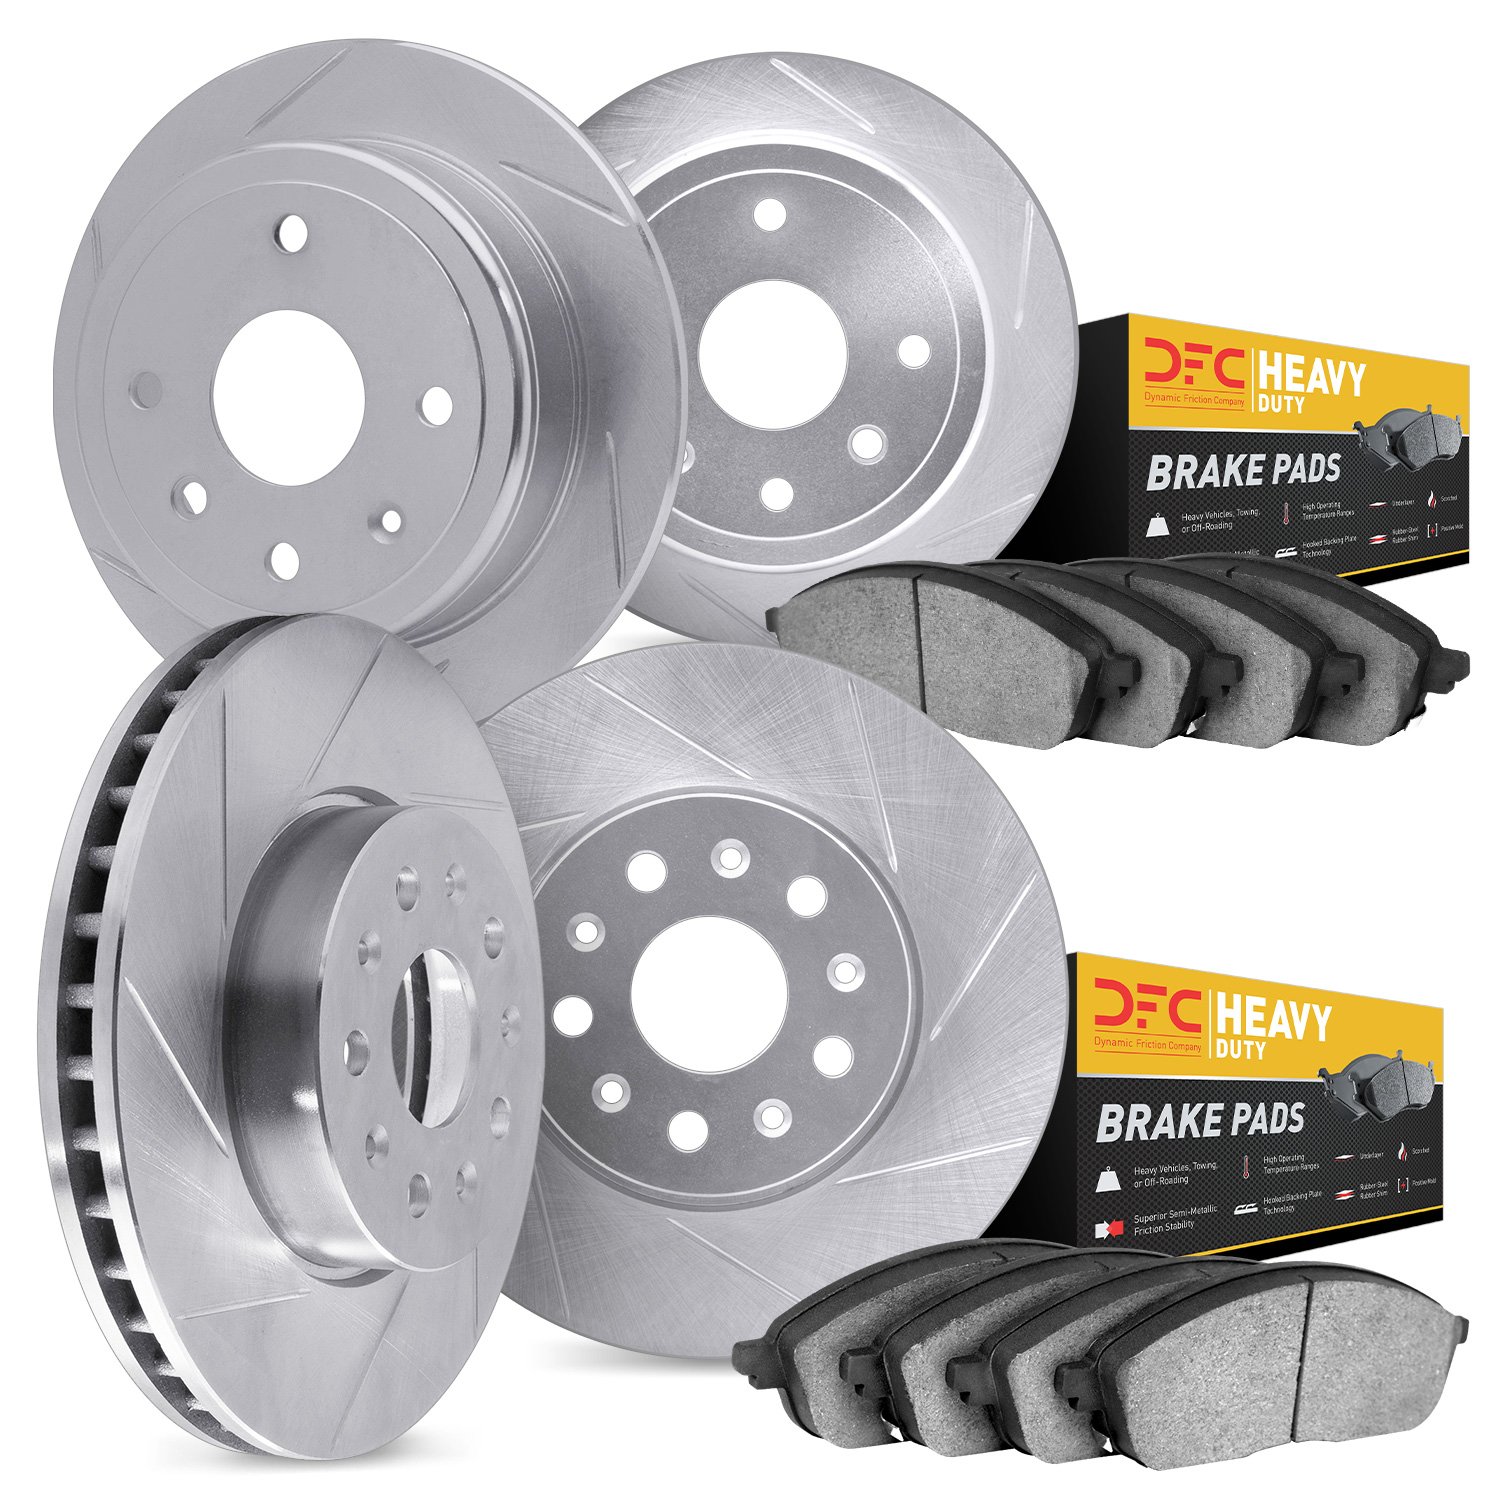 5204-99068 Slotted Brake Rotors w/Heavy-Duty Brake Pads Kits [Silver], 1999-2004 Ford/Lincoln/Mercury/Mazda, Position: Front and